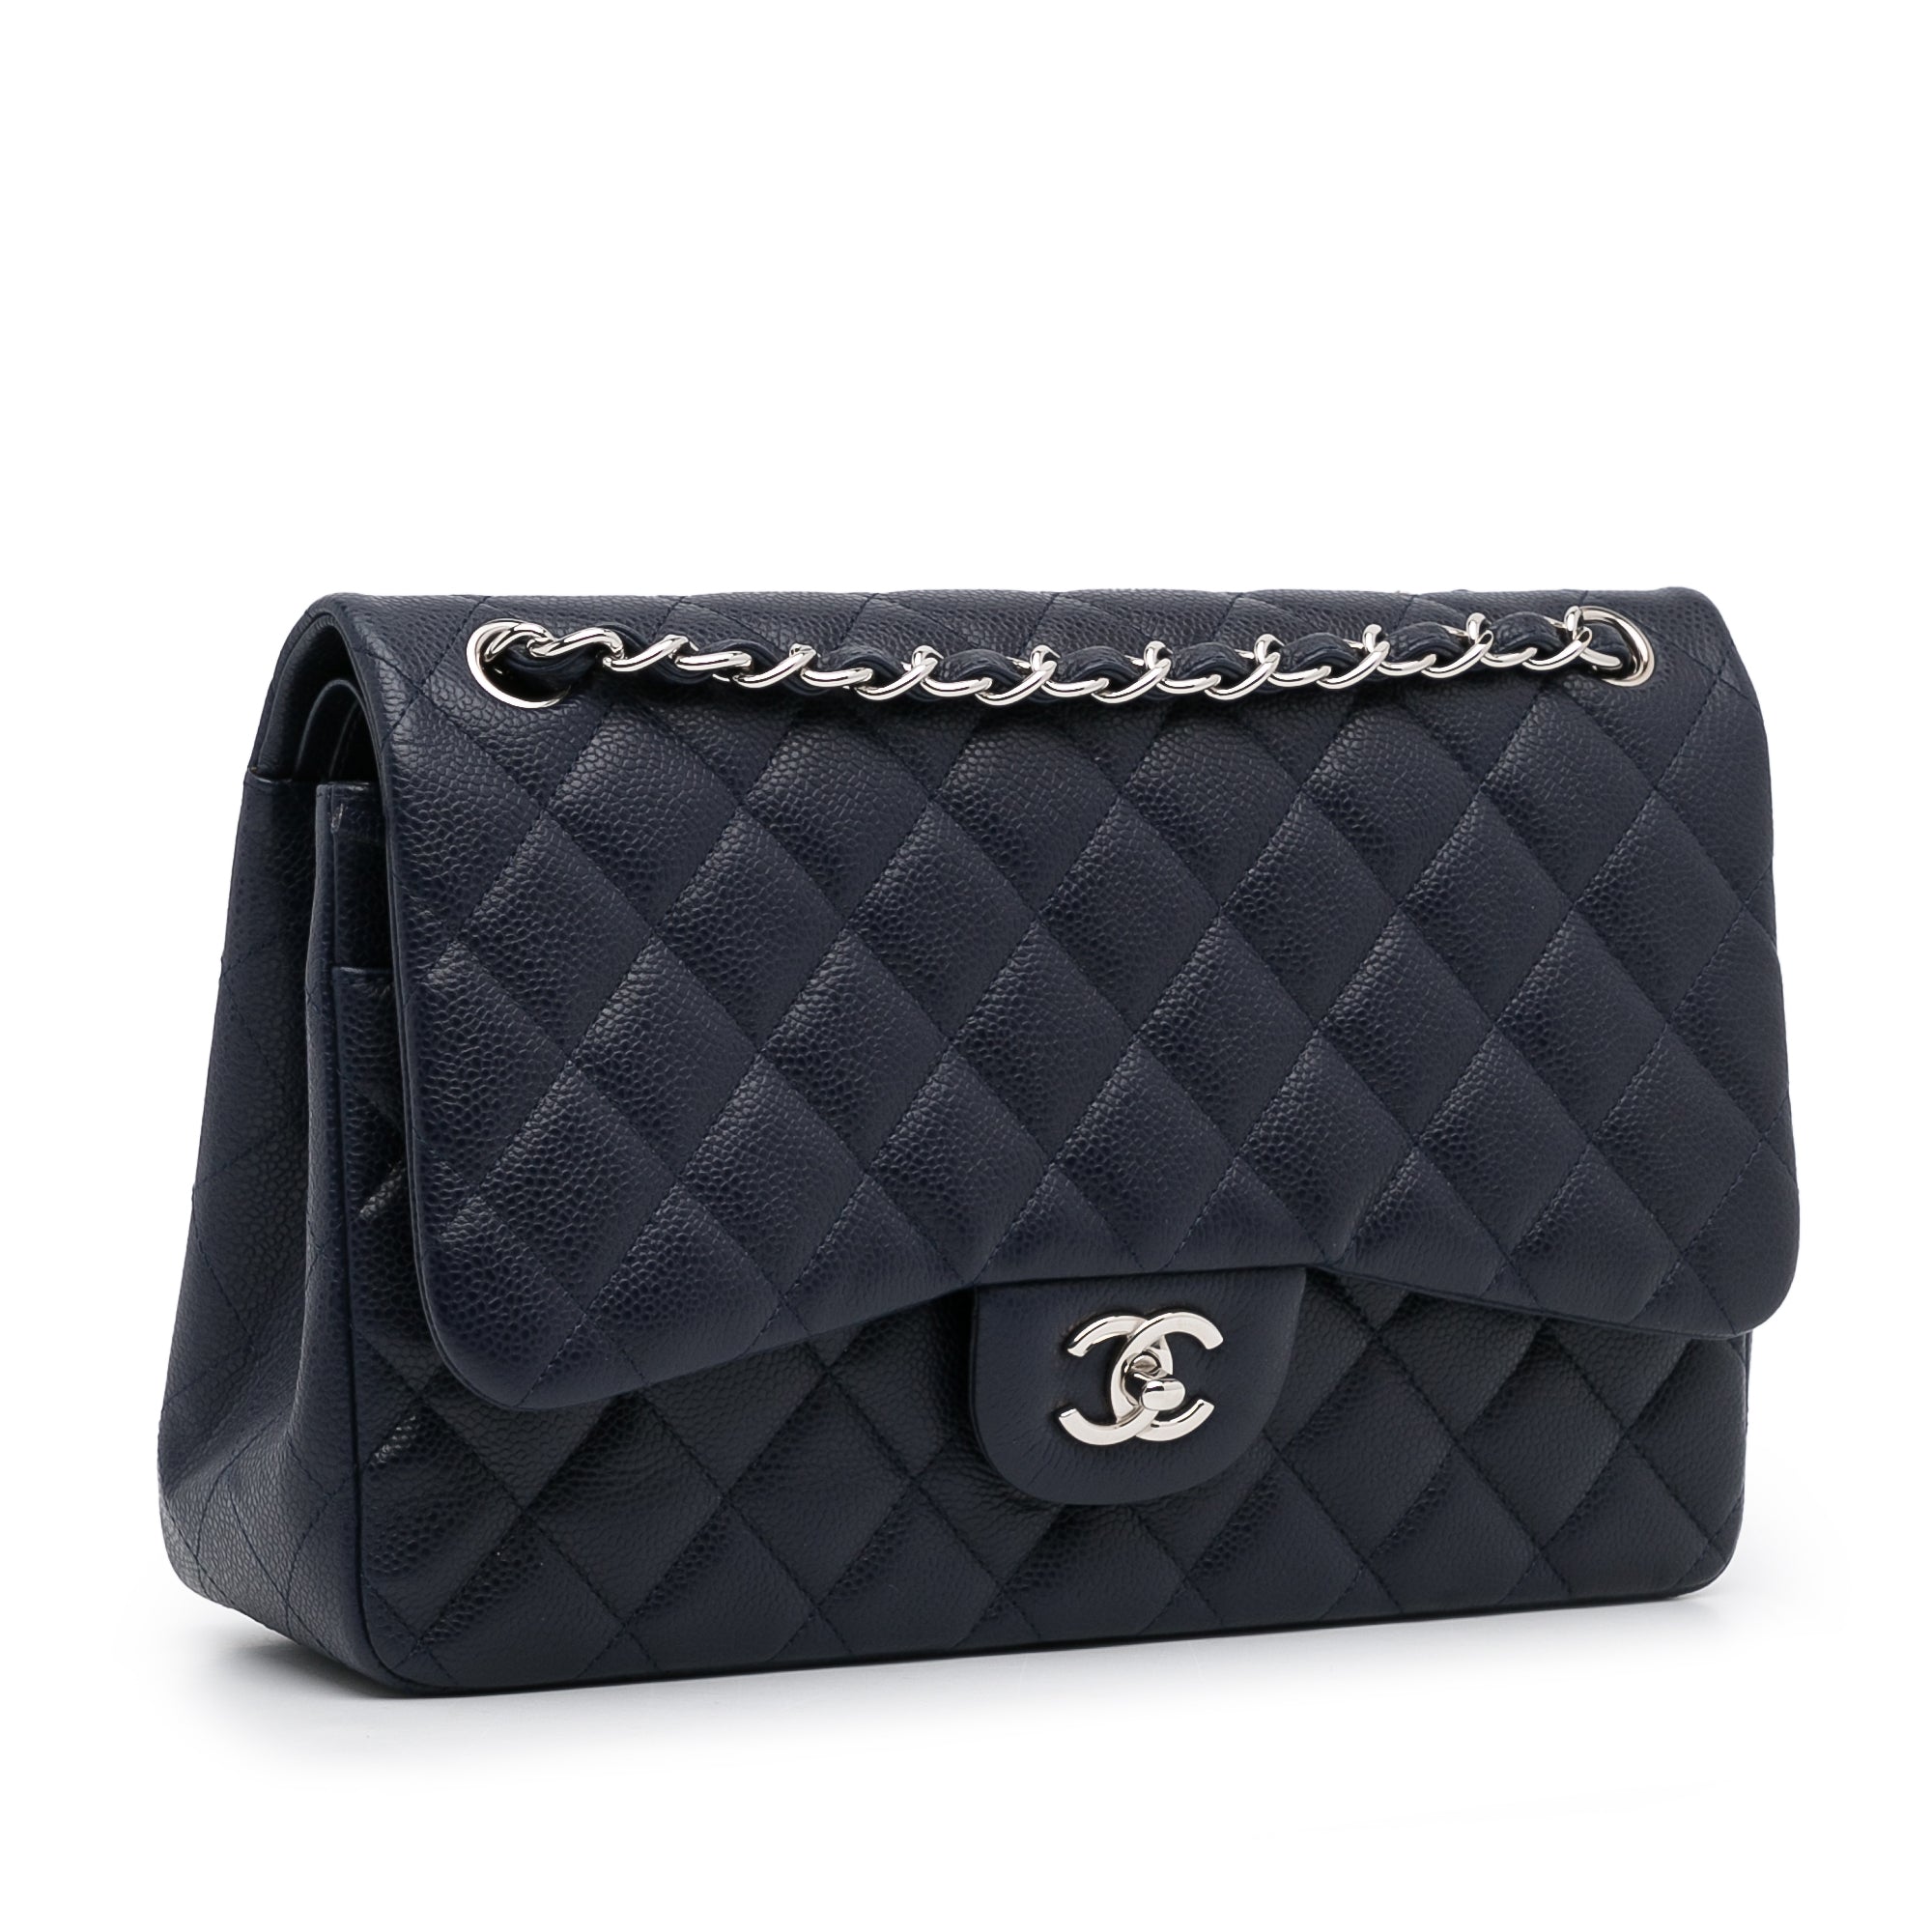 Chanel Jumbo Double Flap Quilted Caviar Leather Shoulder Bag White